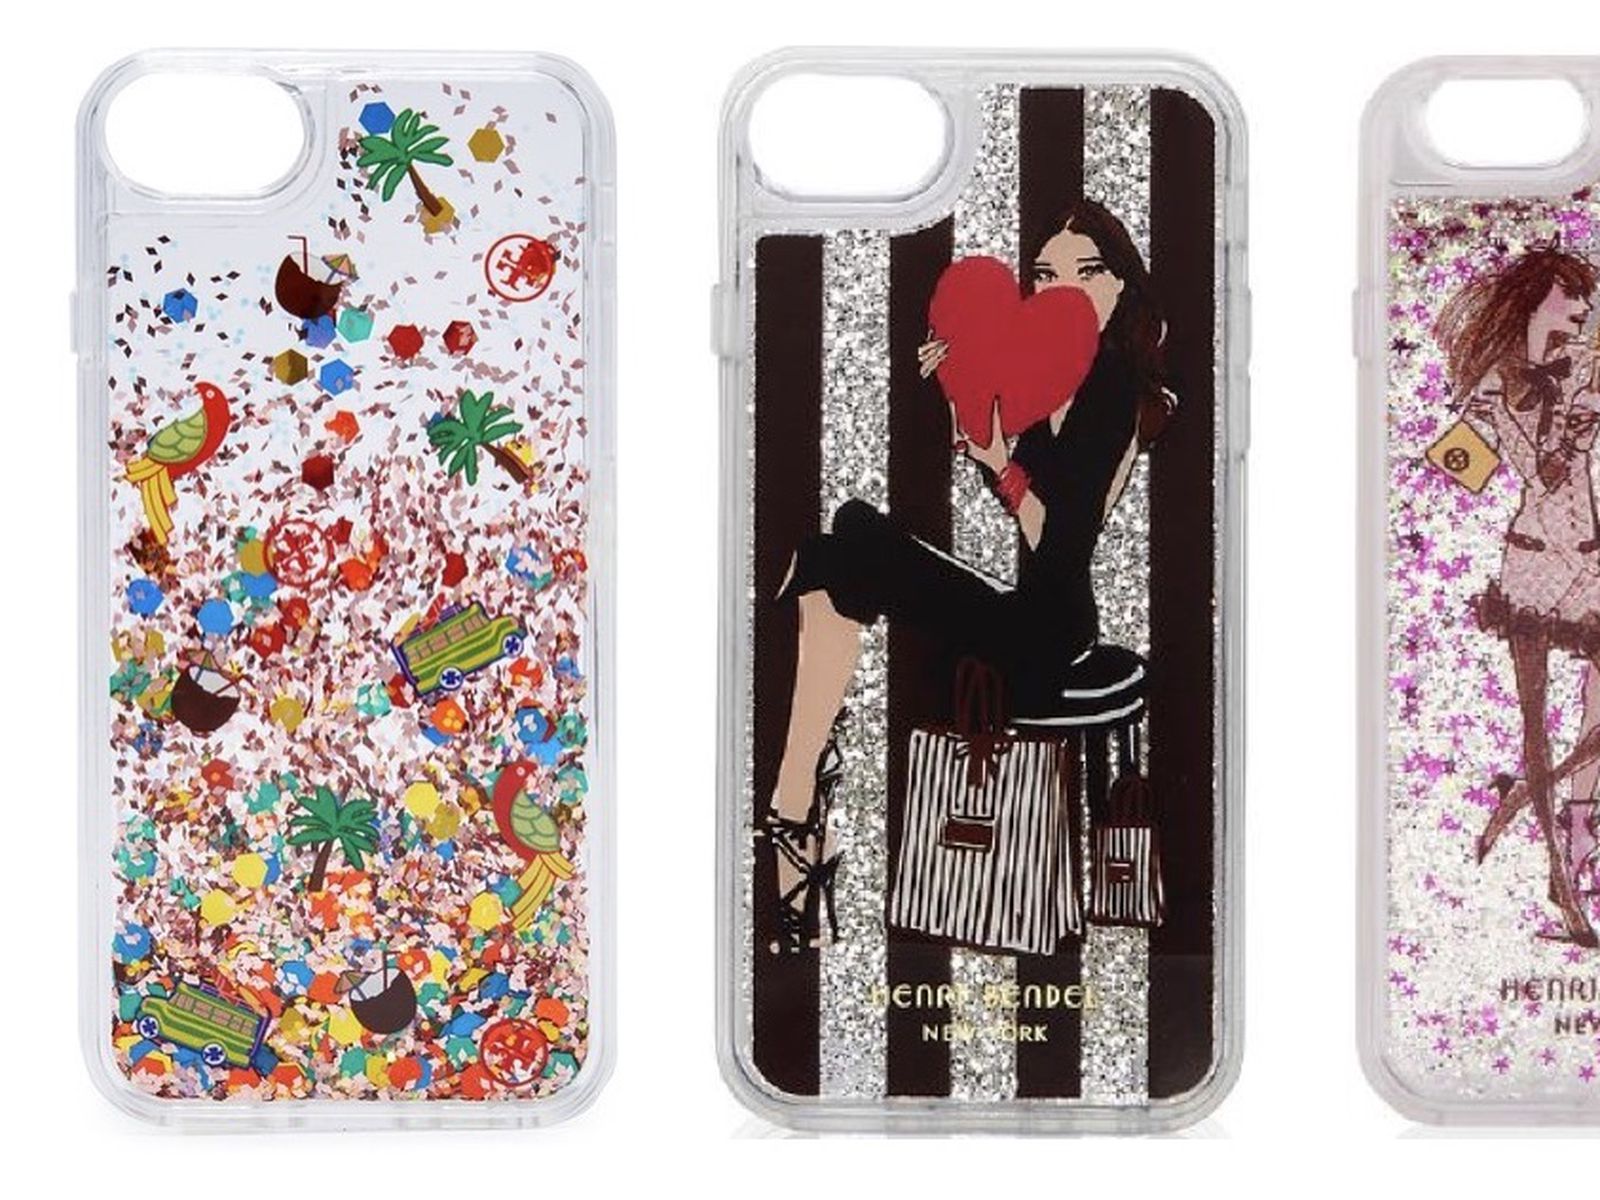 260K Liquid Glitter iPhone Cases Recalled After Reports of Skin Irritation  and Chemical Burns - MacRumors